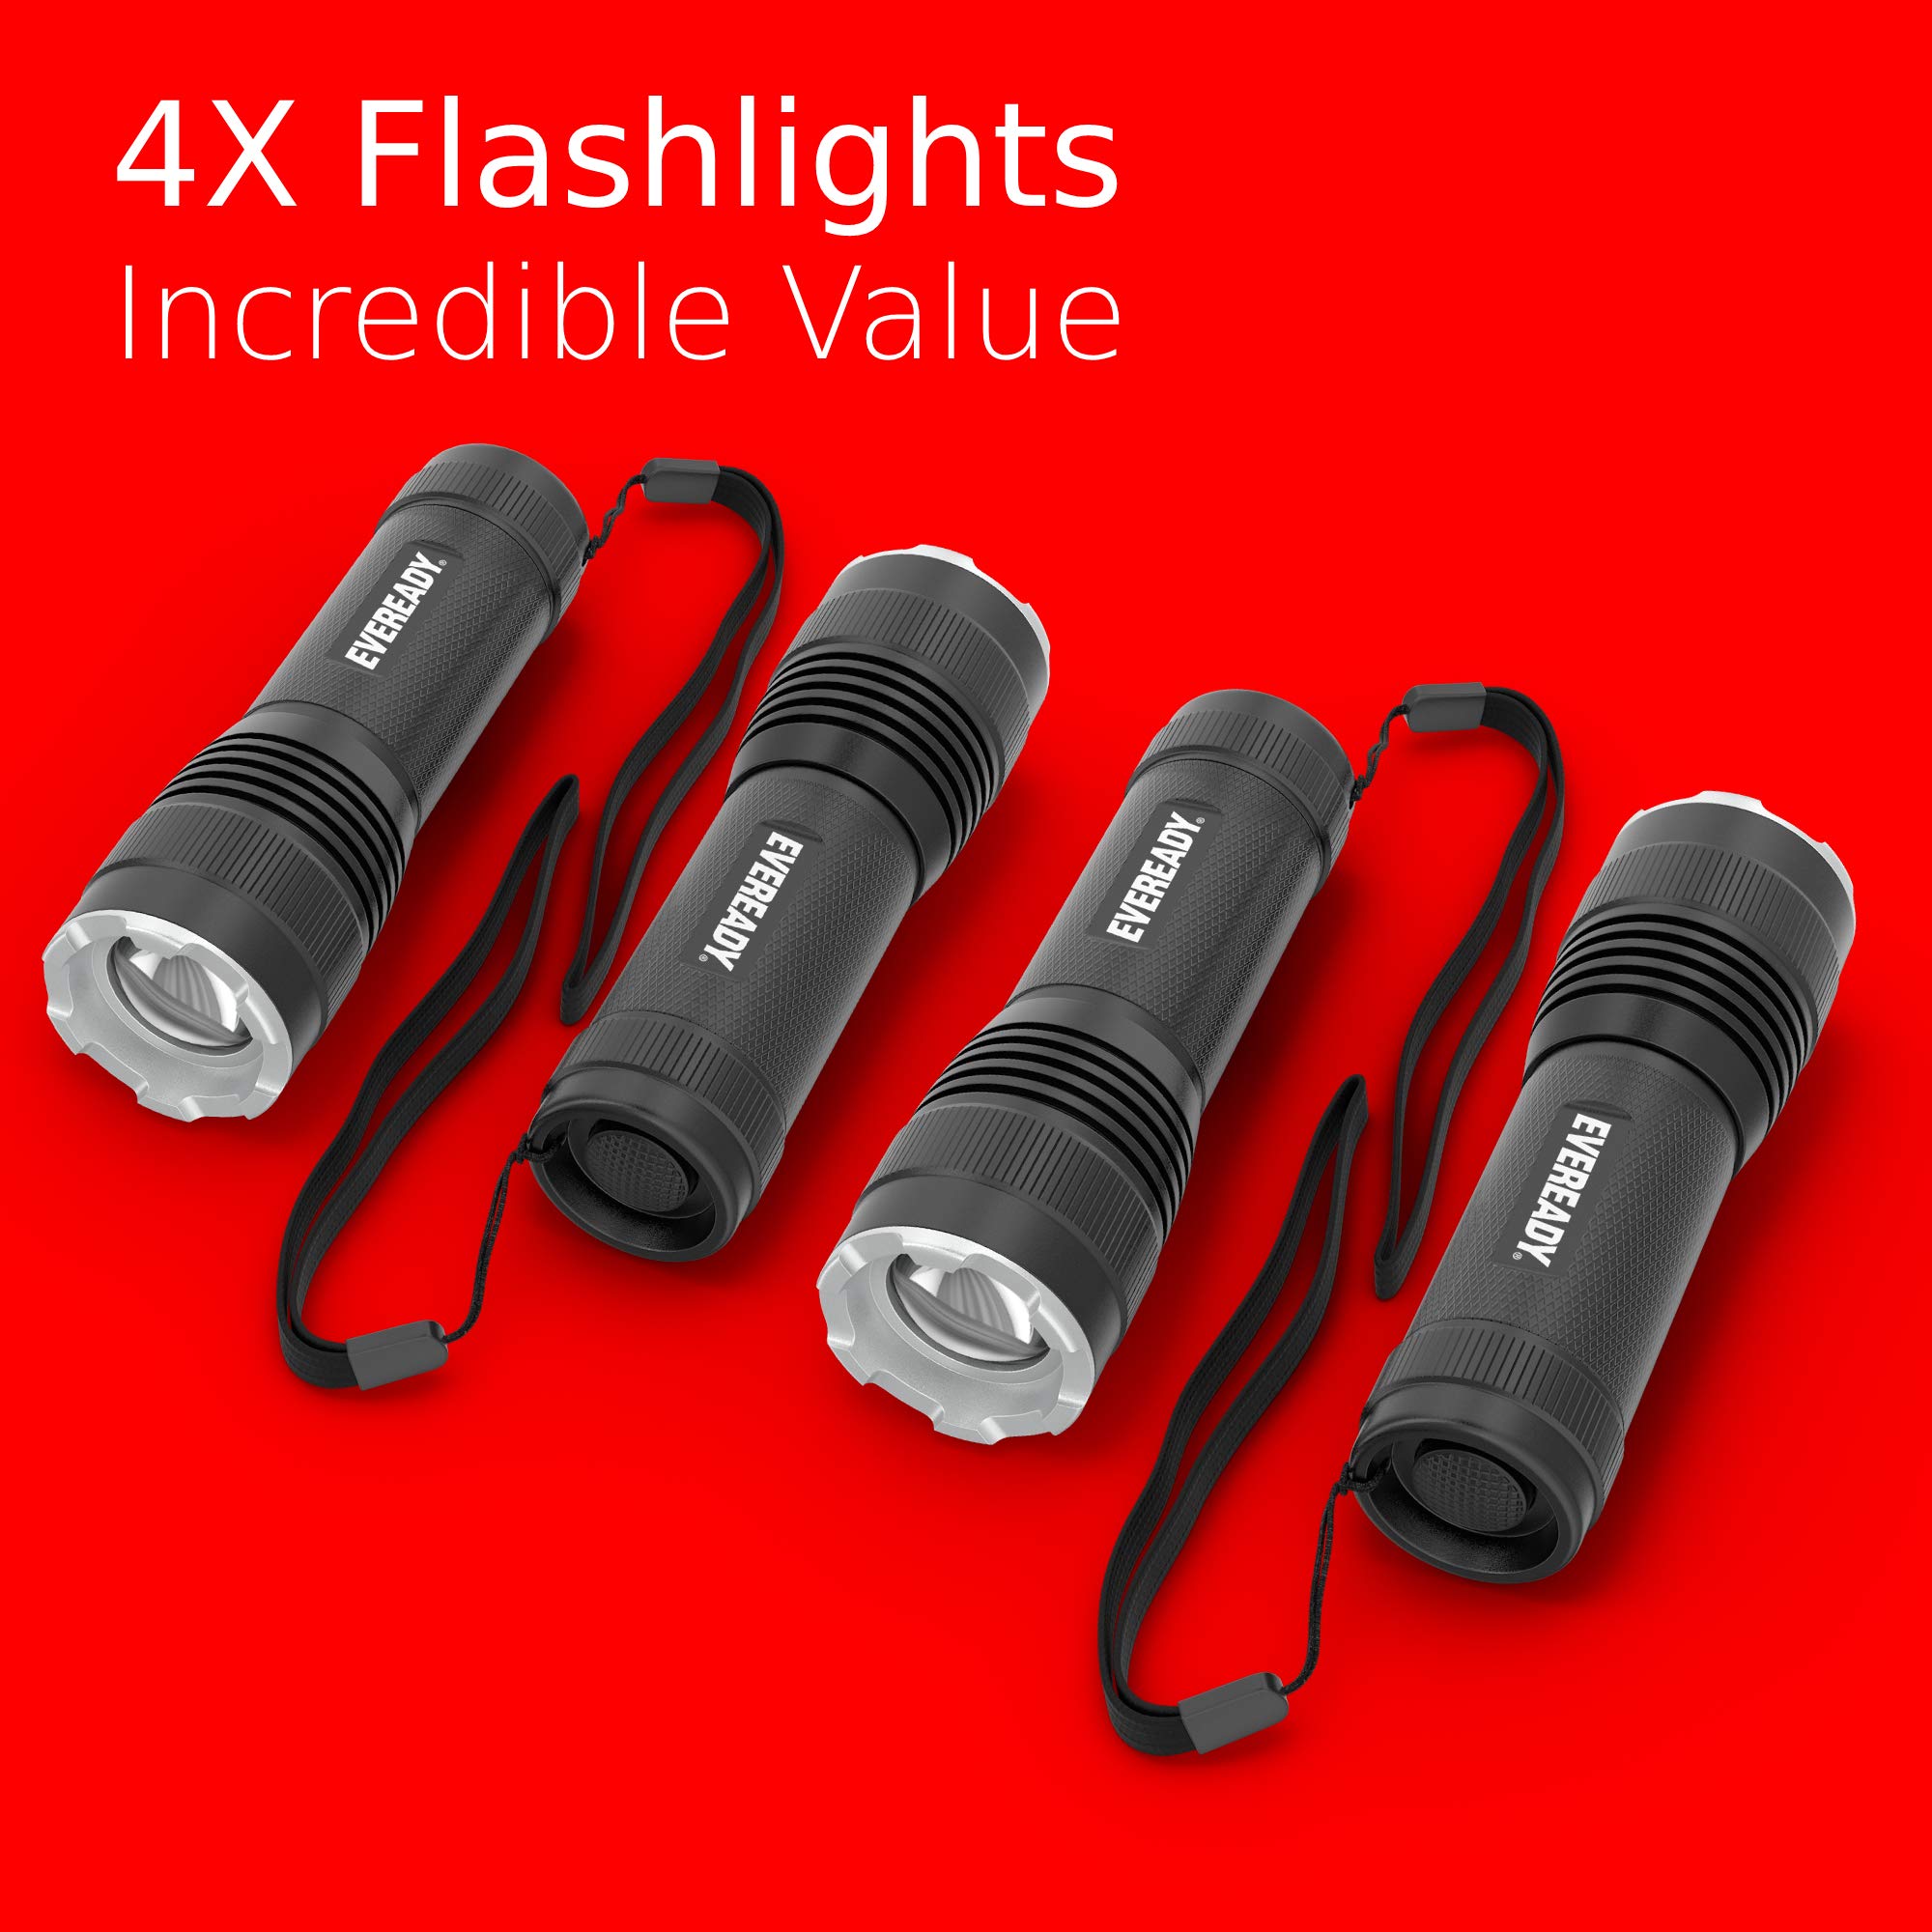 Eveready LED Flashlights (4-Pack) S300 PRO, IPX4 Water Resistant Tactical Flashlight, Bright EDC Torches for Camping, Outdoors, Power Outage Emergencies